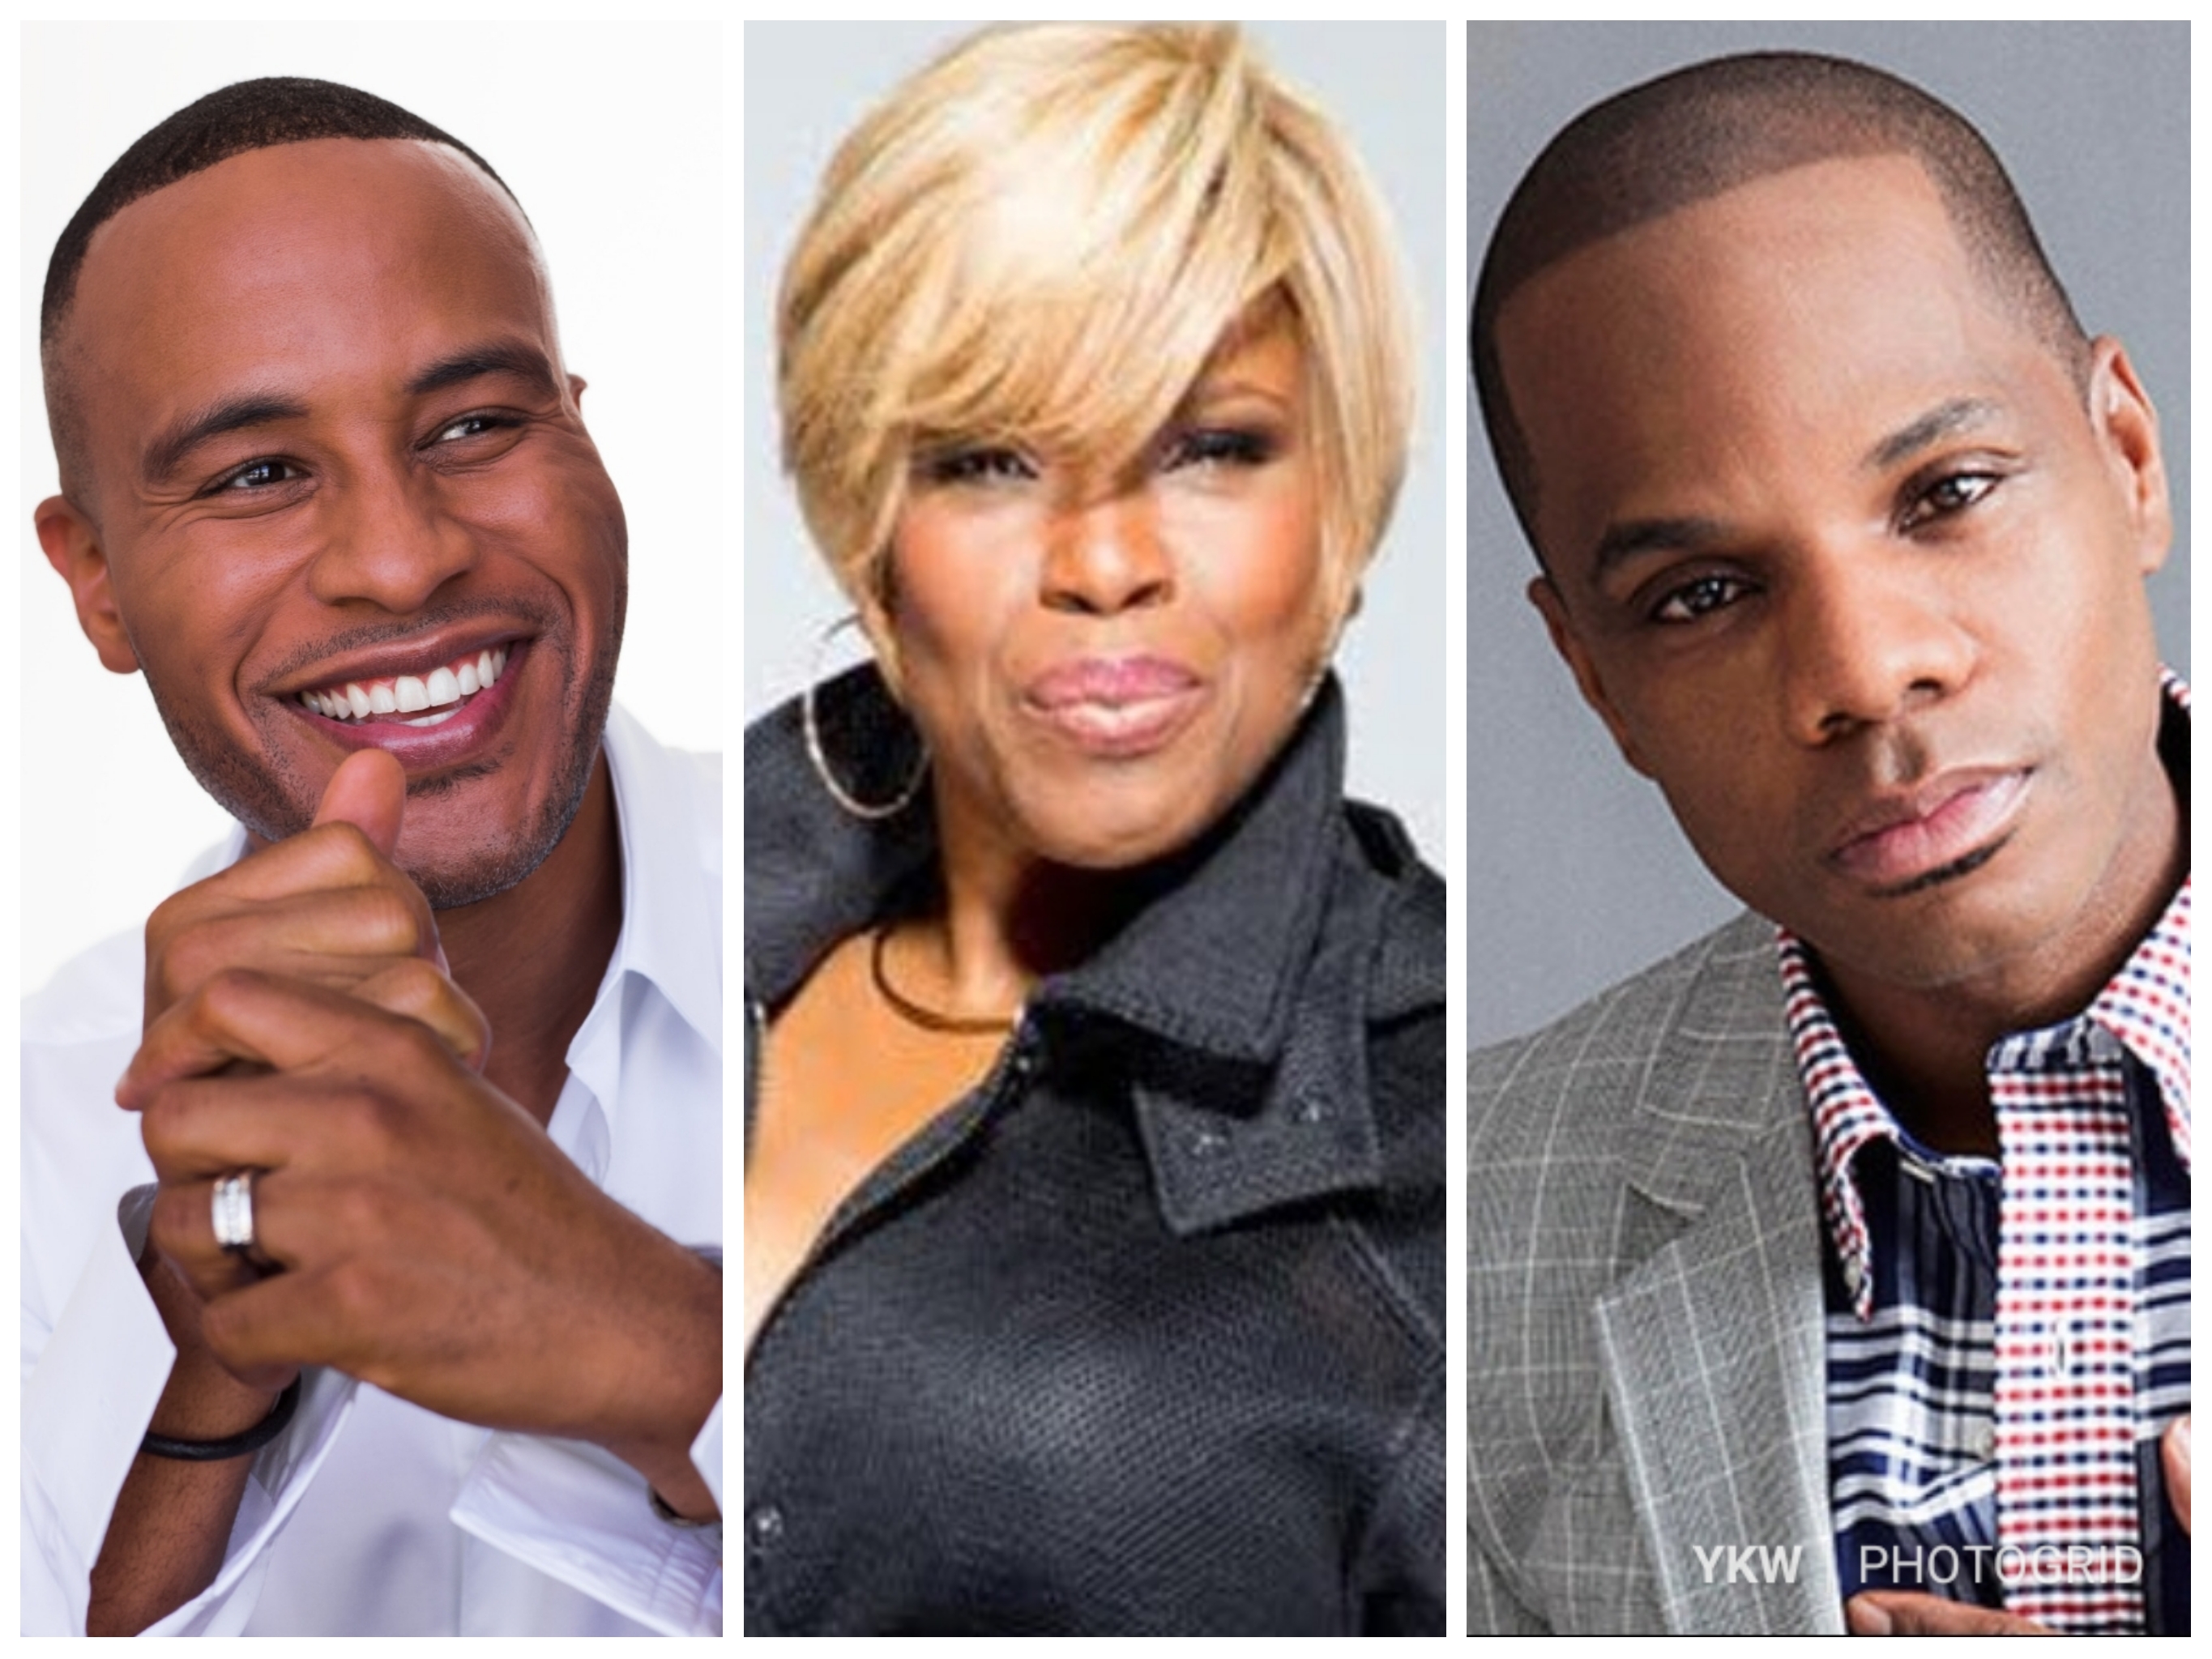 Gospel Music Industry Drama “Kingdom Business” In The Works At NBC With Producers DeVon Franklin, Dr. Holly Carter, And Kirk Franklin